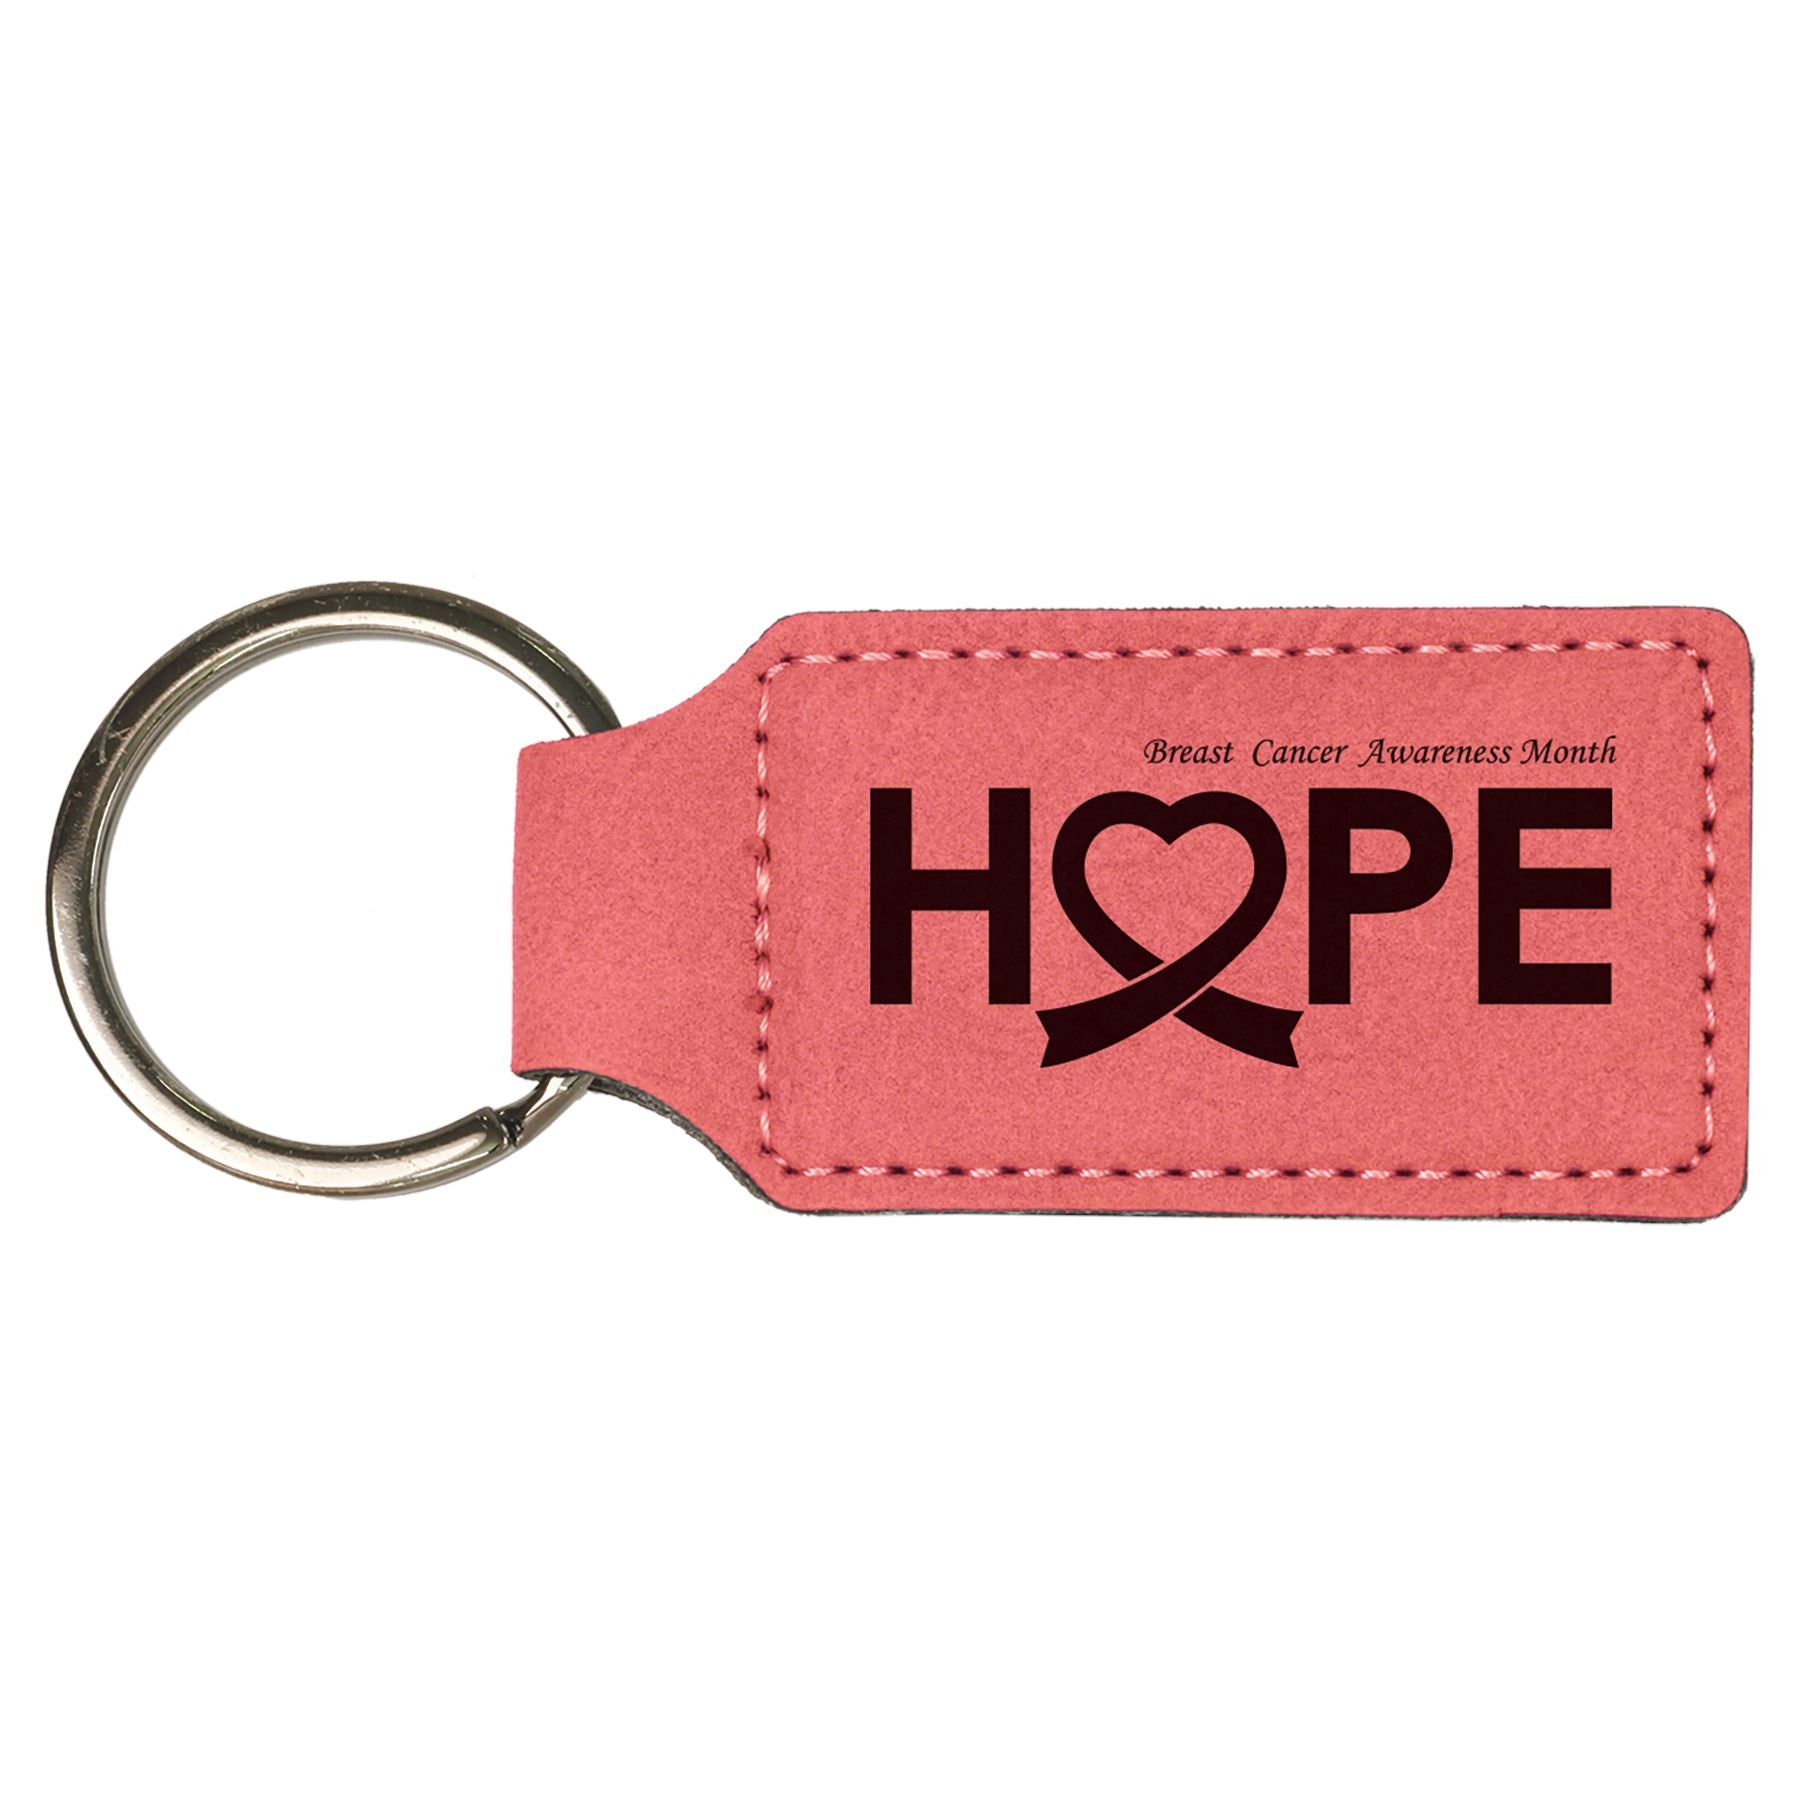 Rectangle Shaped Keychain with Keyring, 2 3/4" x 1 1/4" Laserable Leatherette - Craftworks NW, LLC